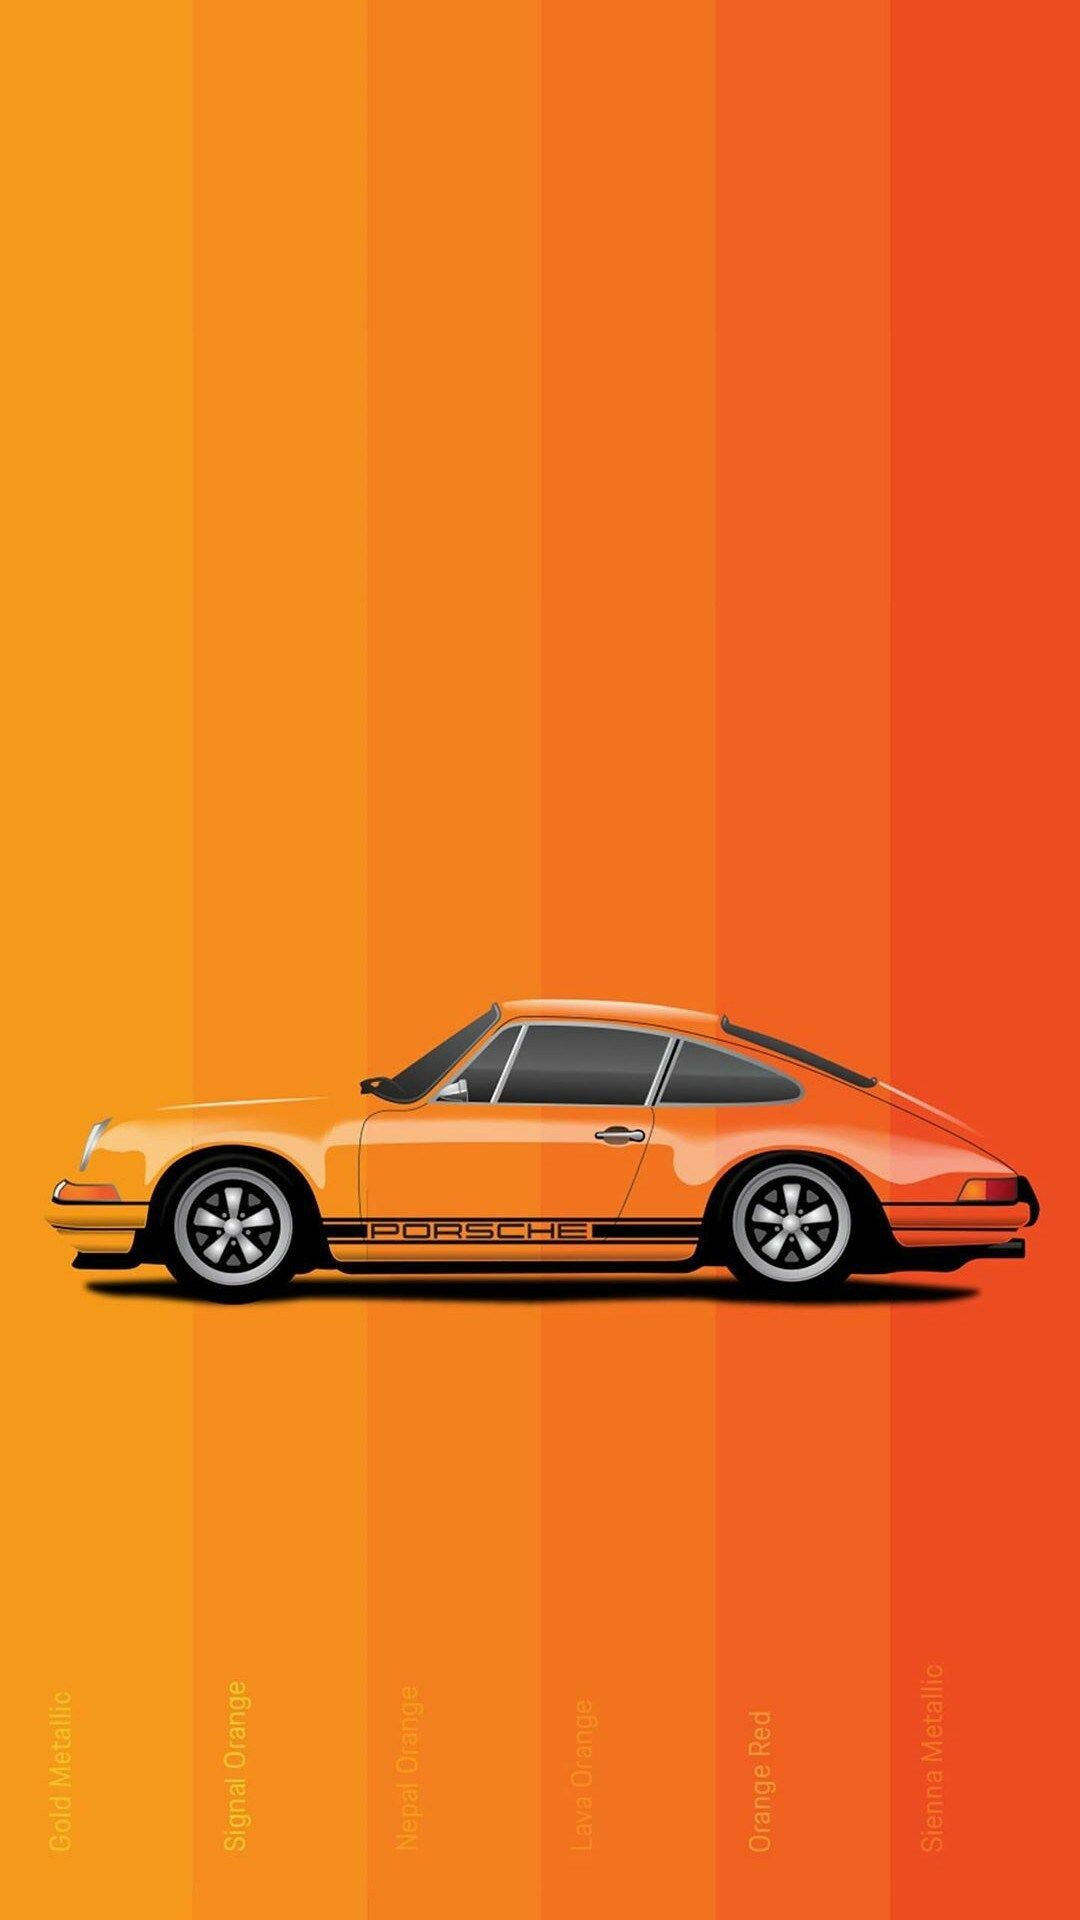 Porsche 911: High performance rear-engined sports car introduced in September 1964. 1080x1920 Full HD Wallpaper.